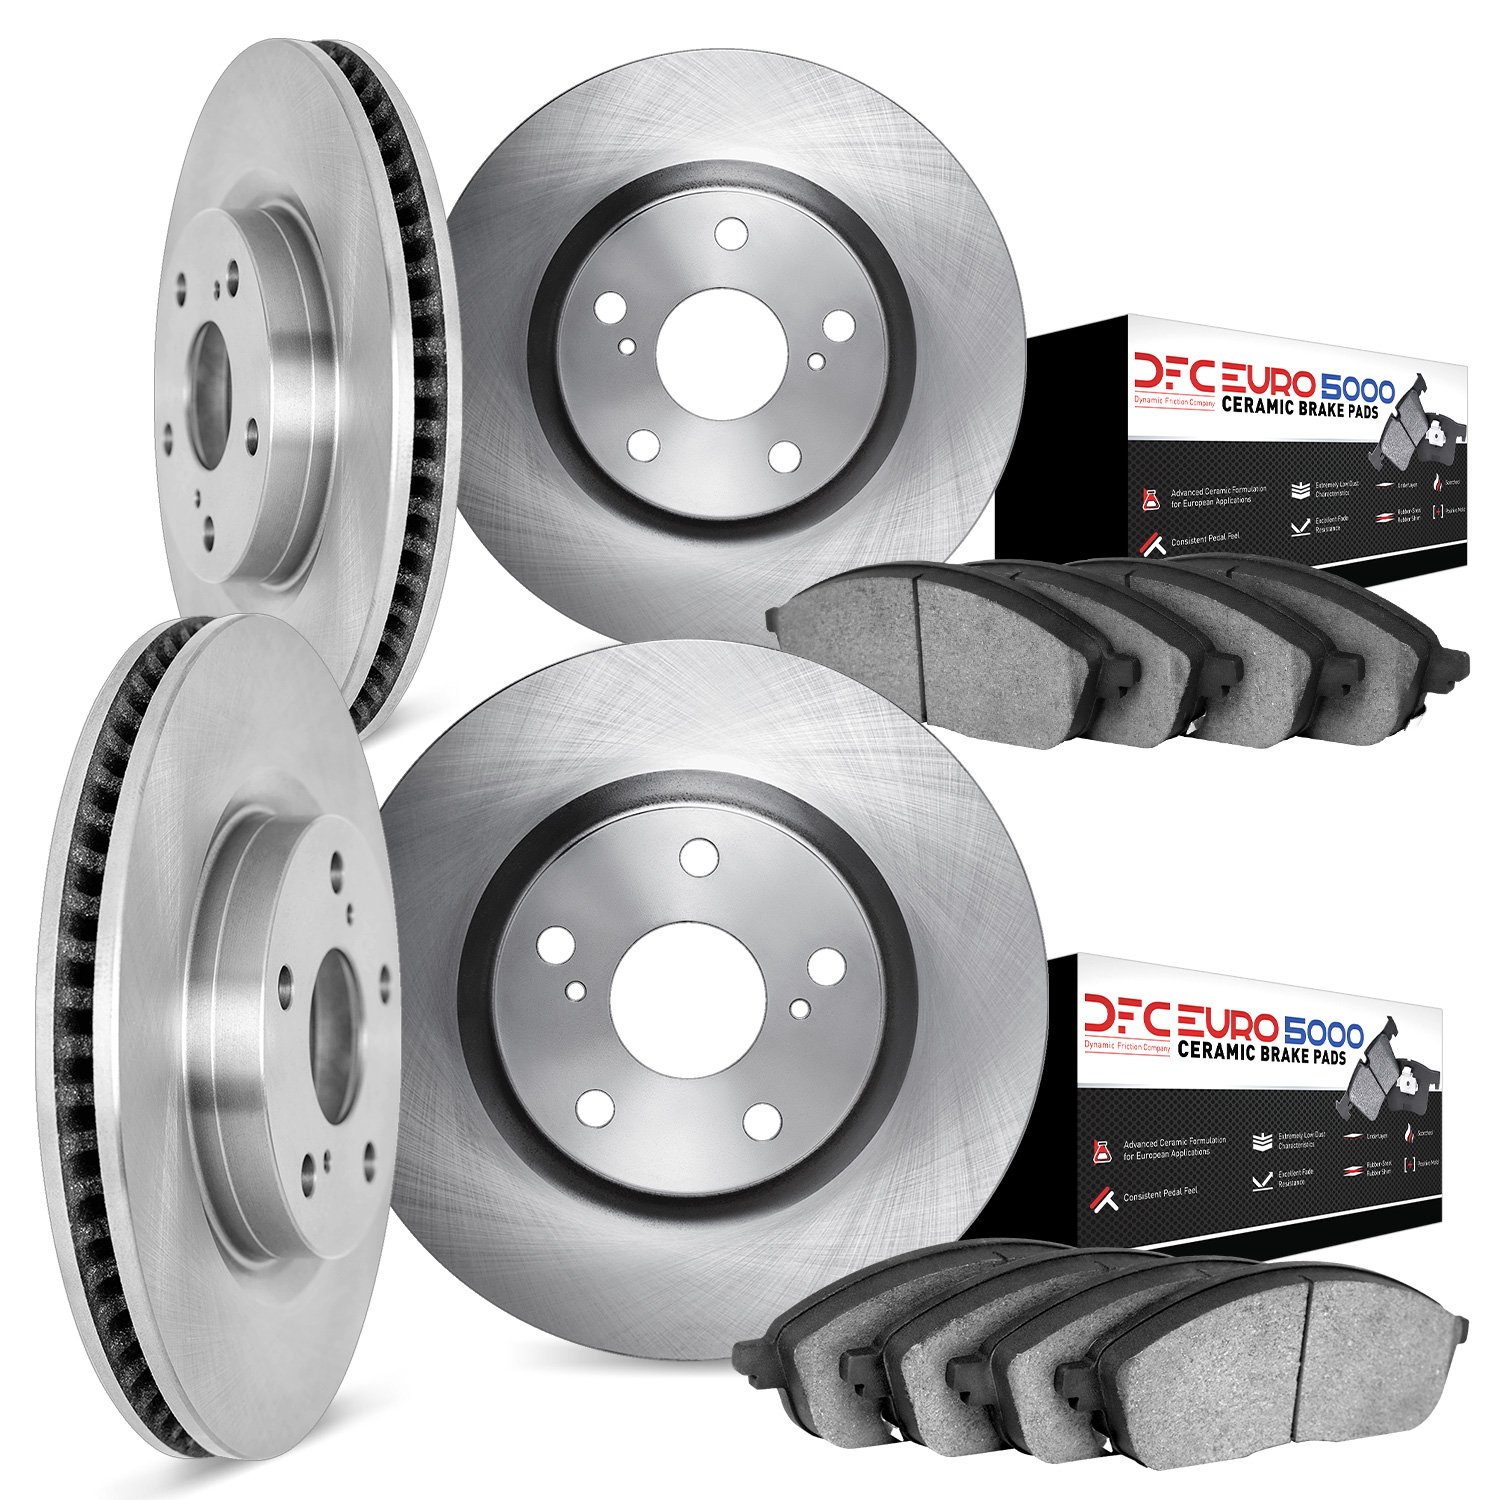 6604-11000 Brake Rotors w/5000 Euro Ceramic Brake Pads, 2005-2009 Land Rover, Position: Front and Rear